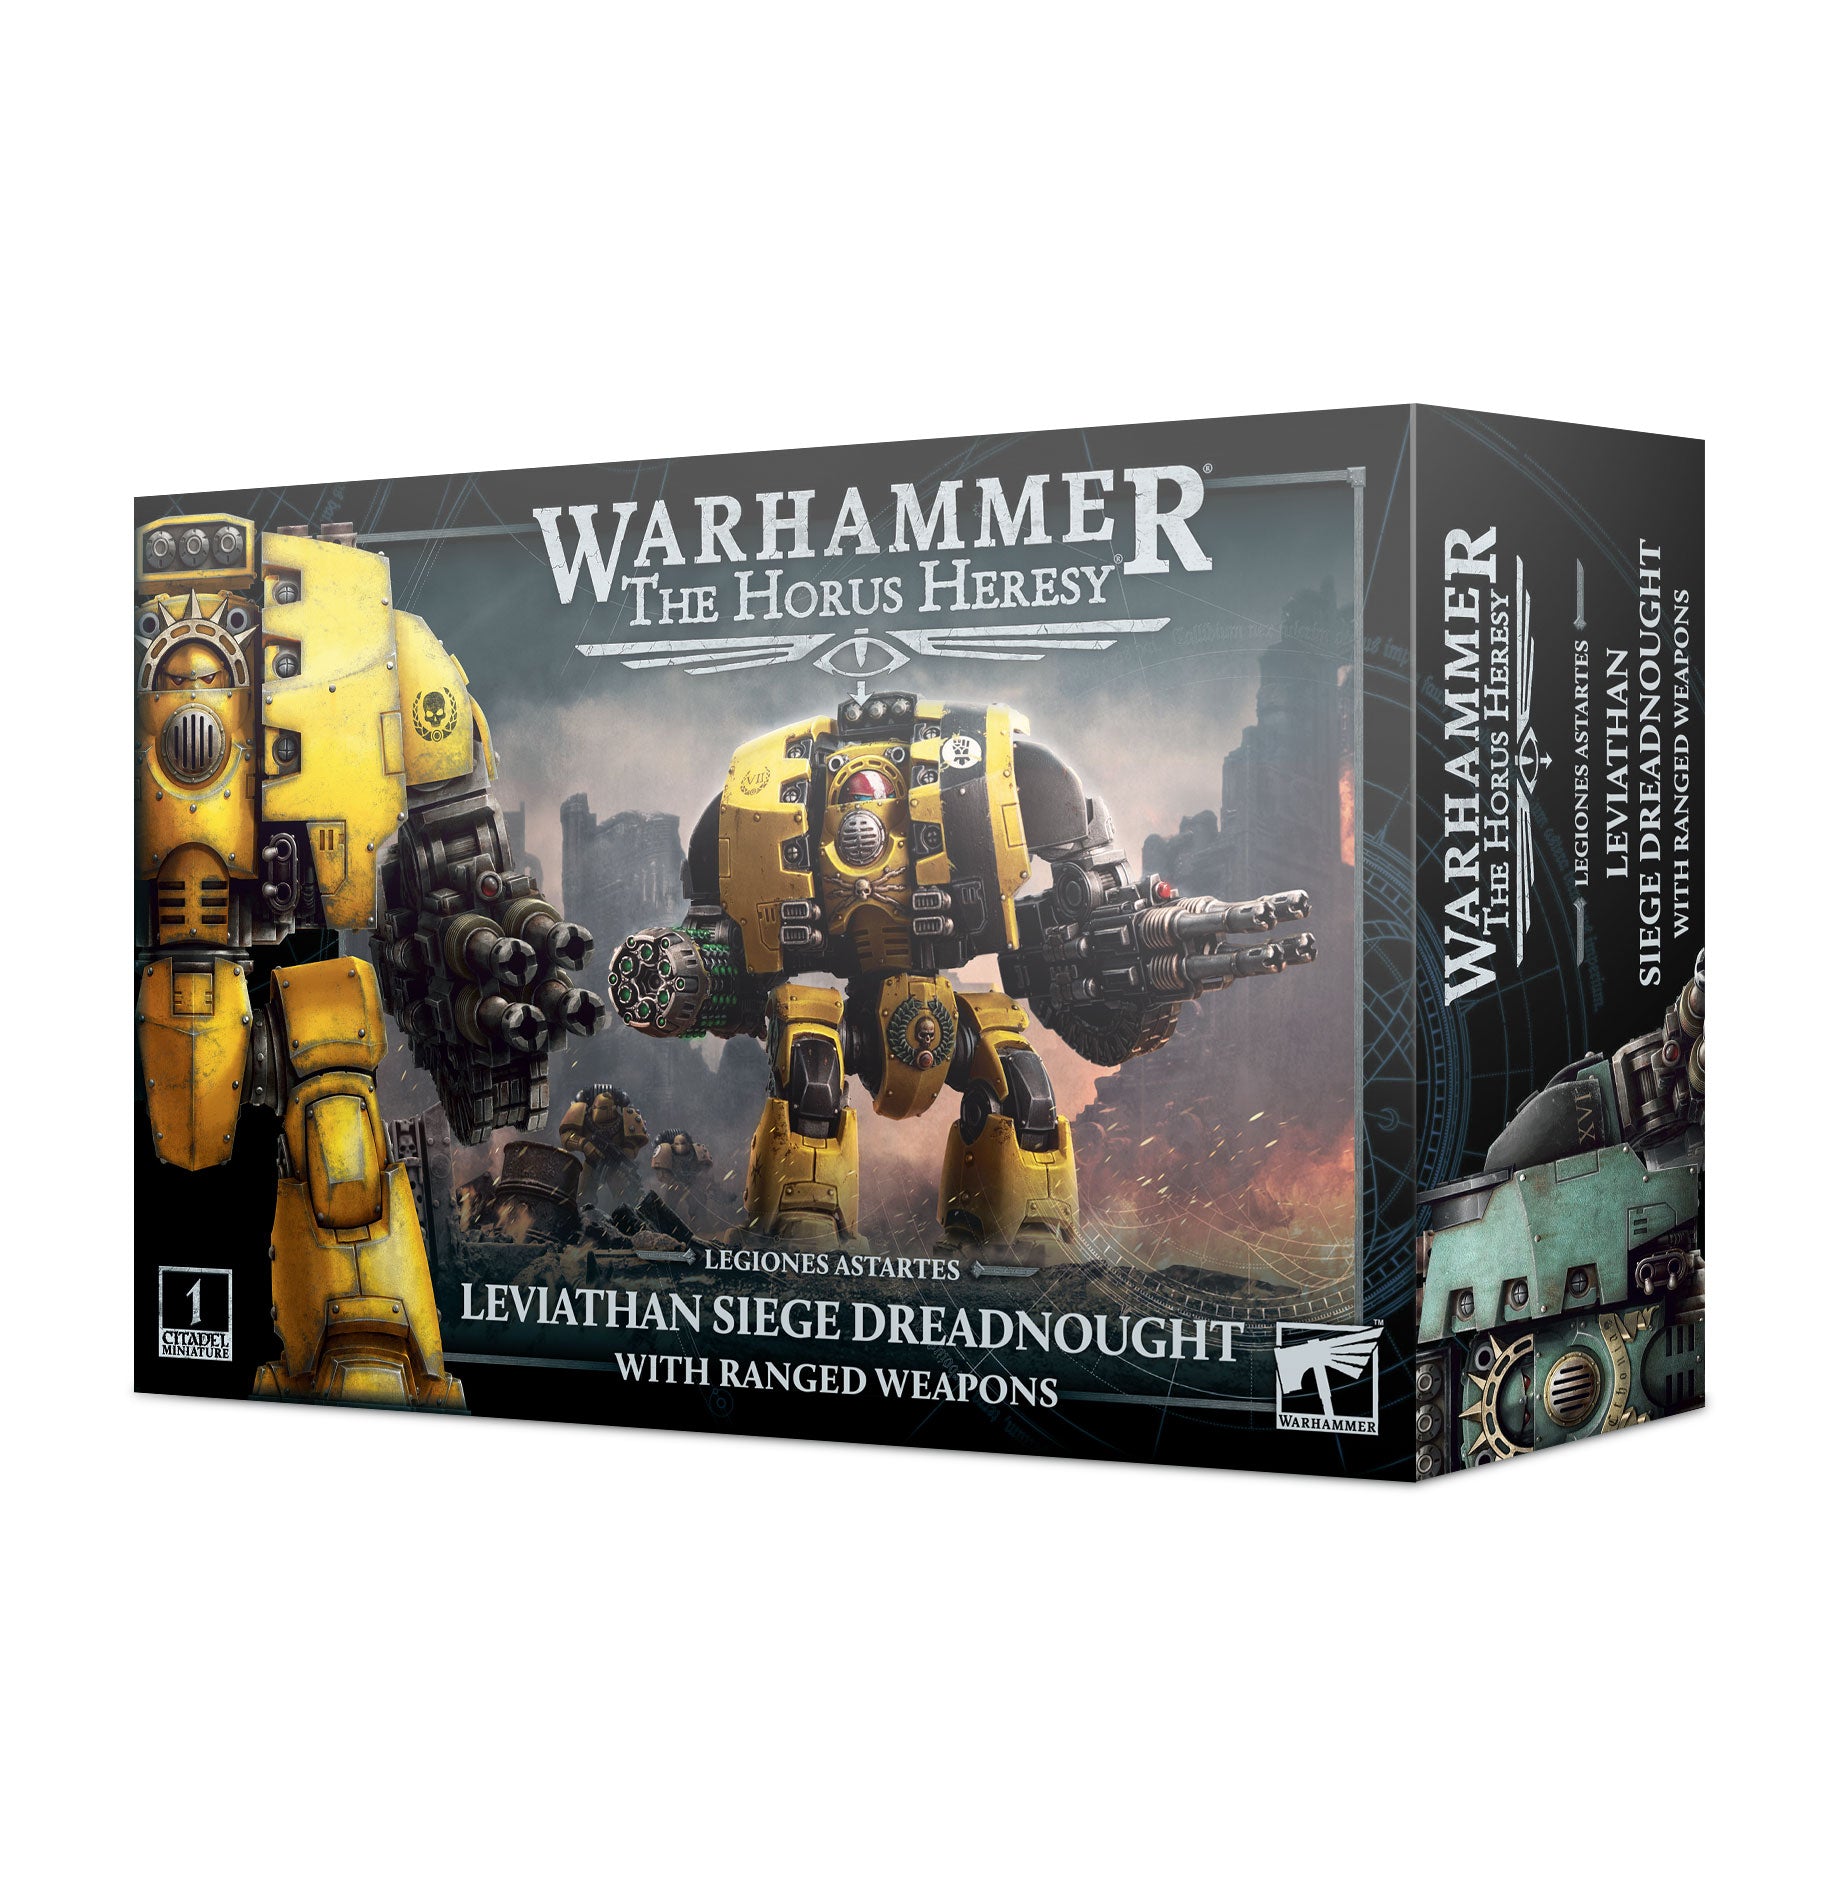 Warhammer Horus Heresy: Legiones Astartes Leviathan Siege Dreadnought with Ranged Weapons